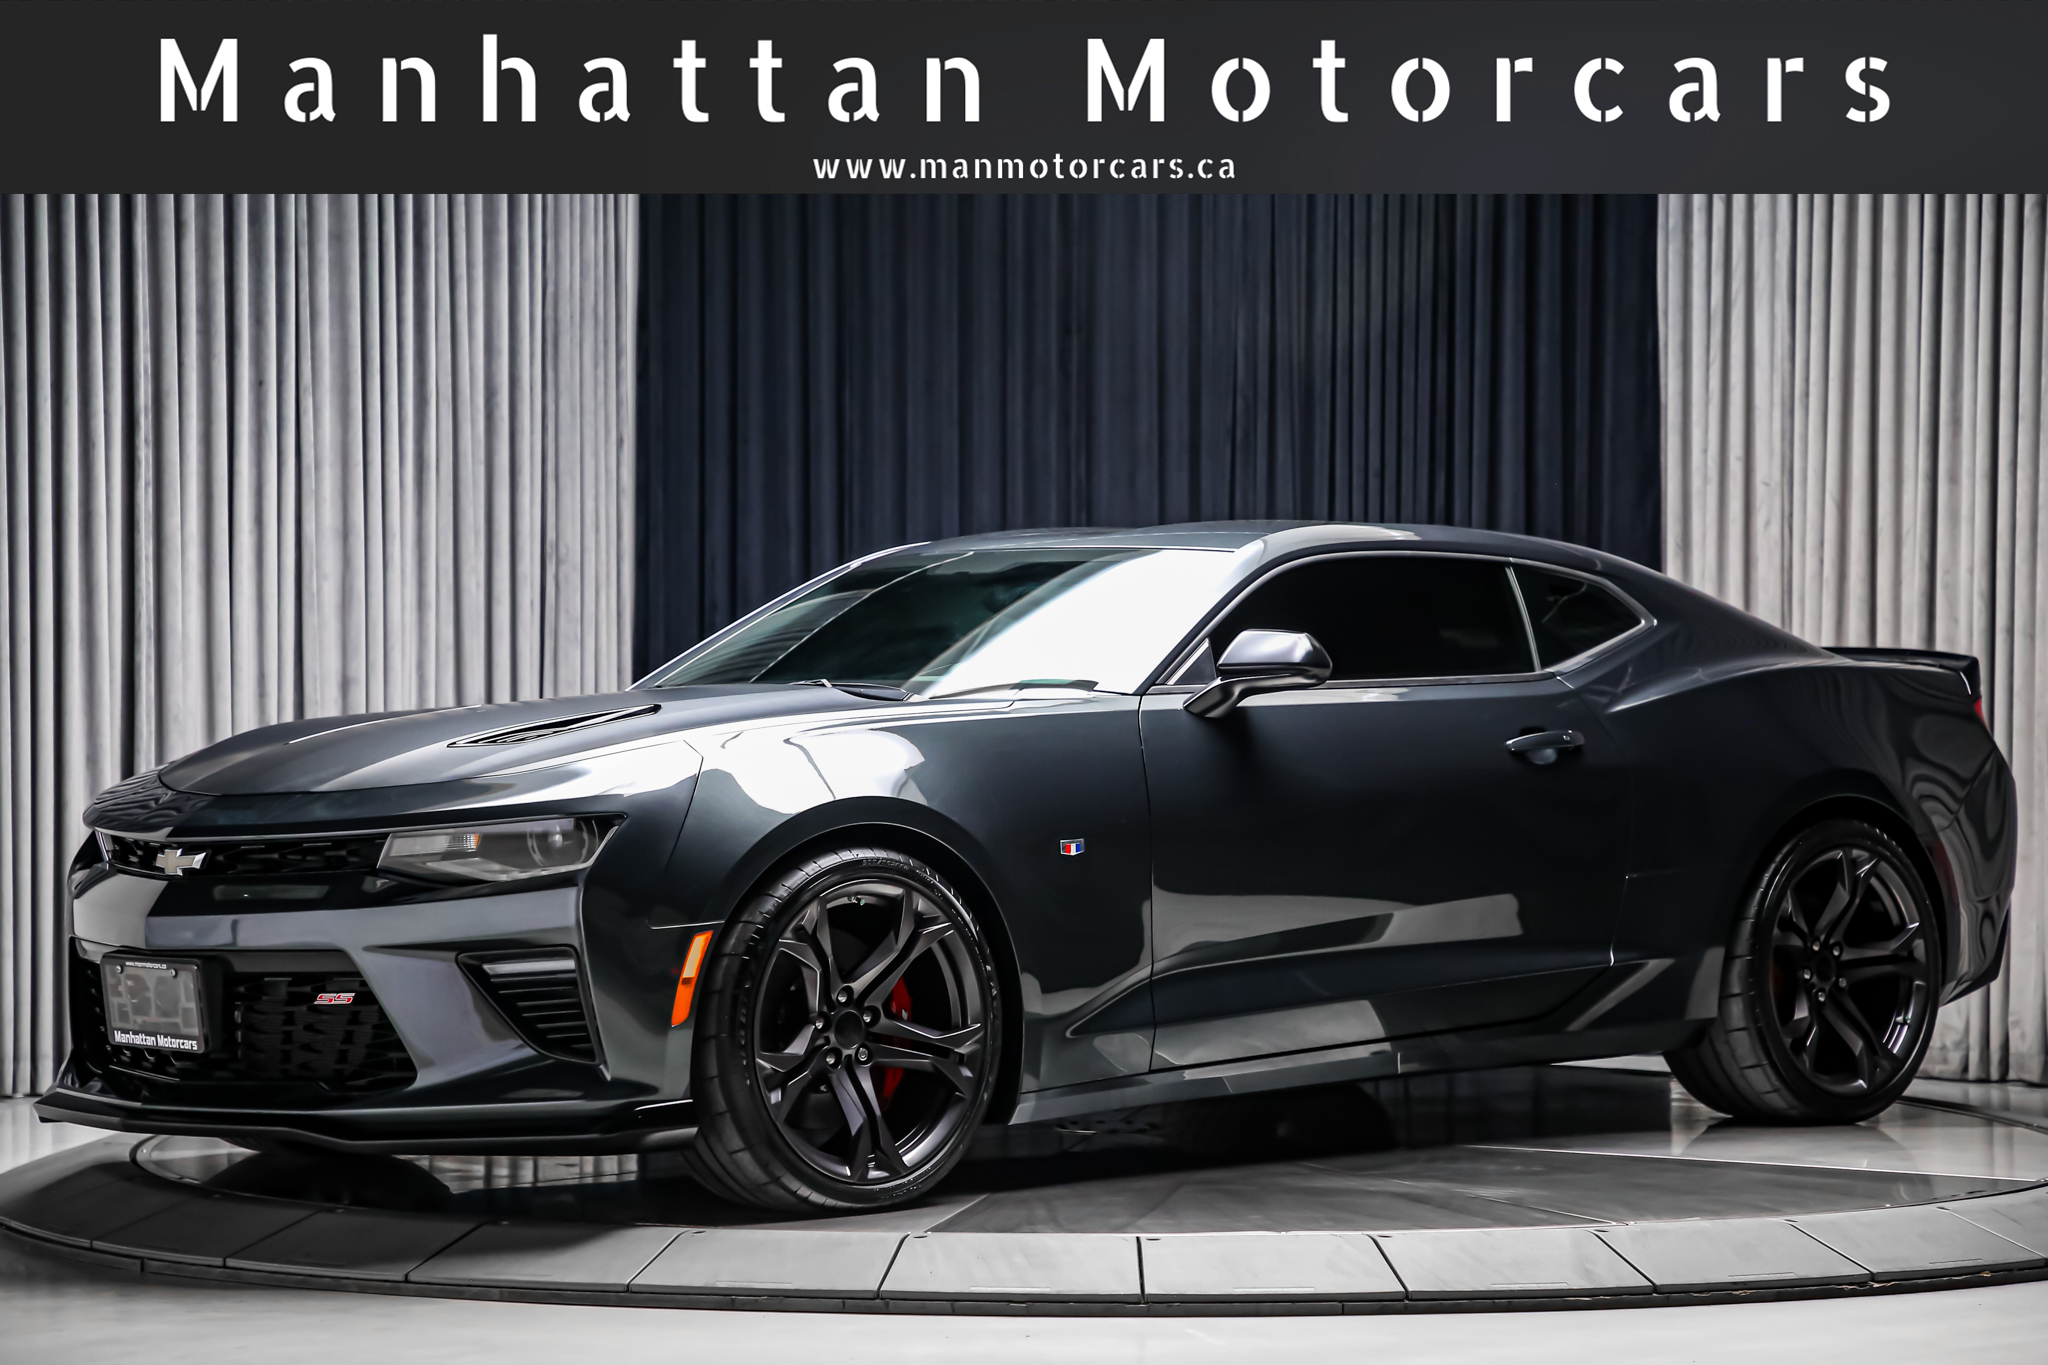 2017 Chevrolet Camaro SS 1LE V8 455HP MANUAL |NOACCIDENT|LOWKMONLY11K